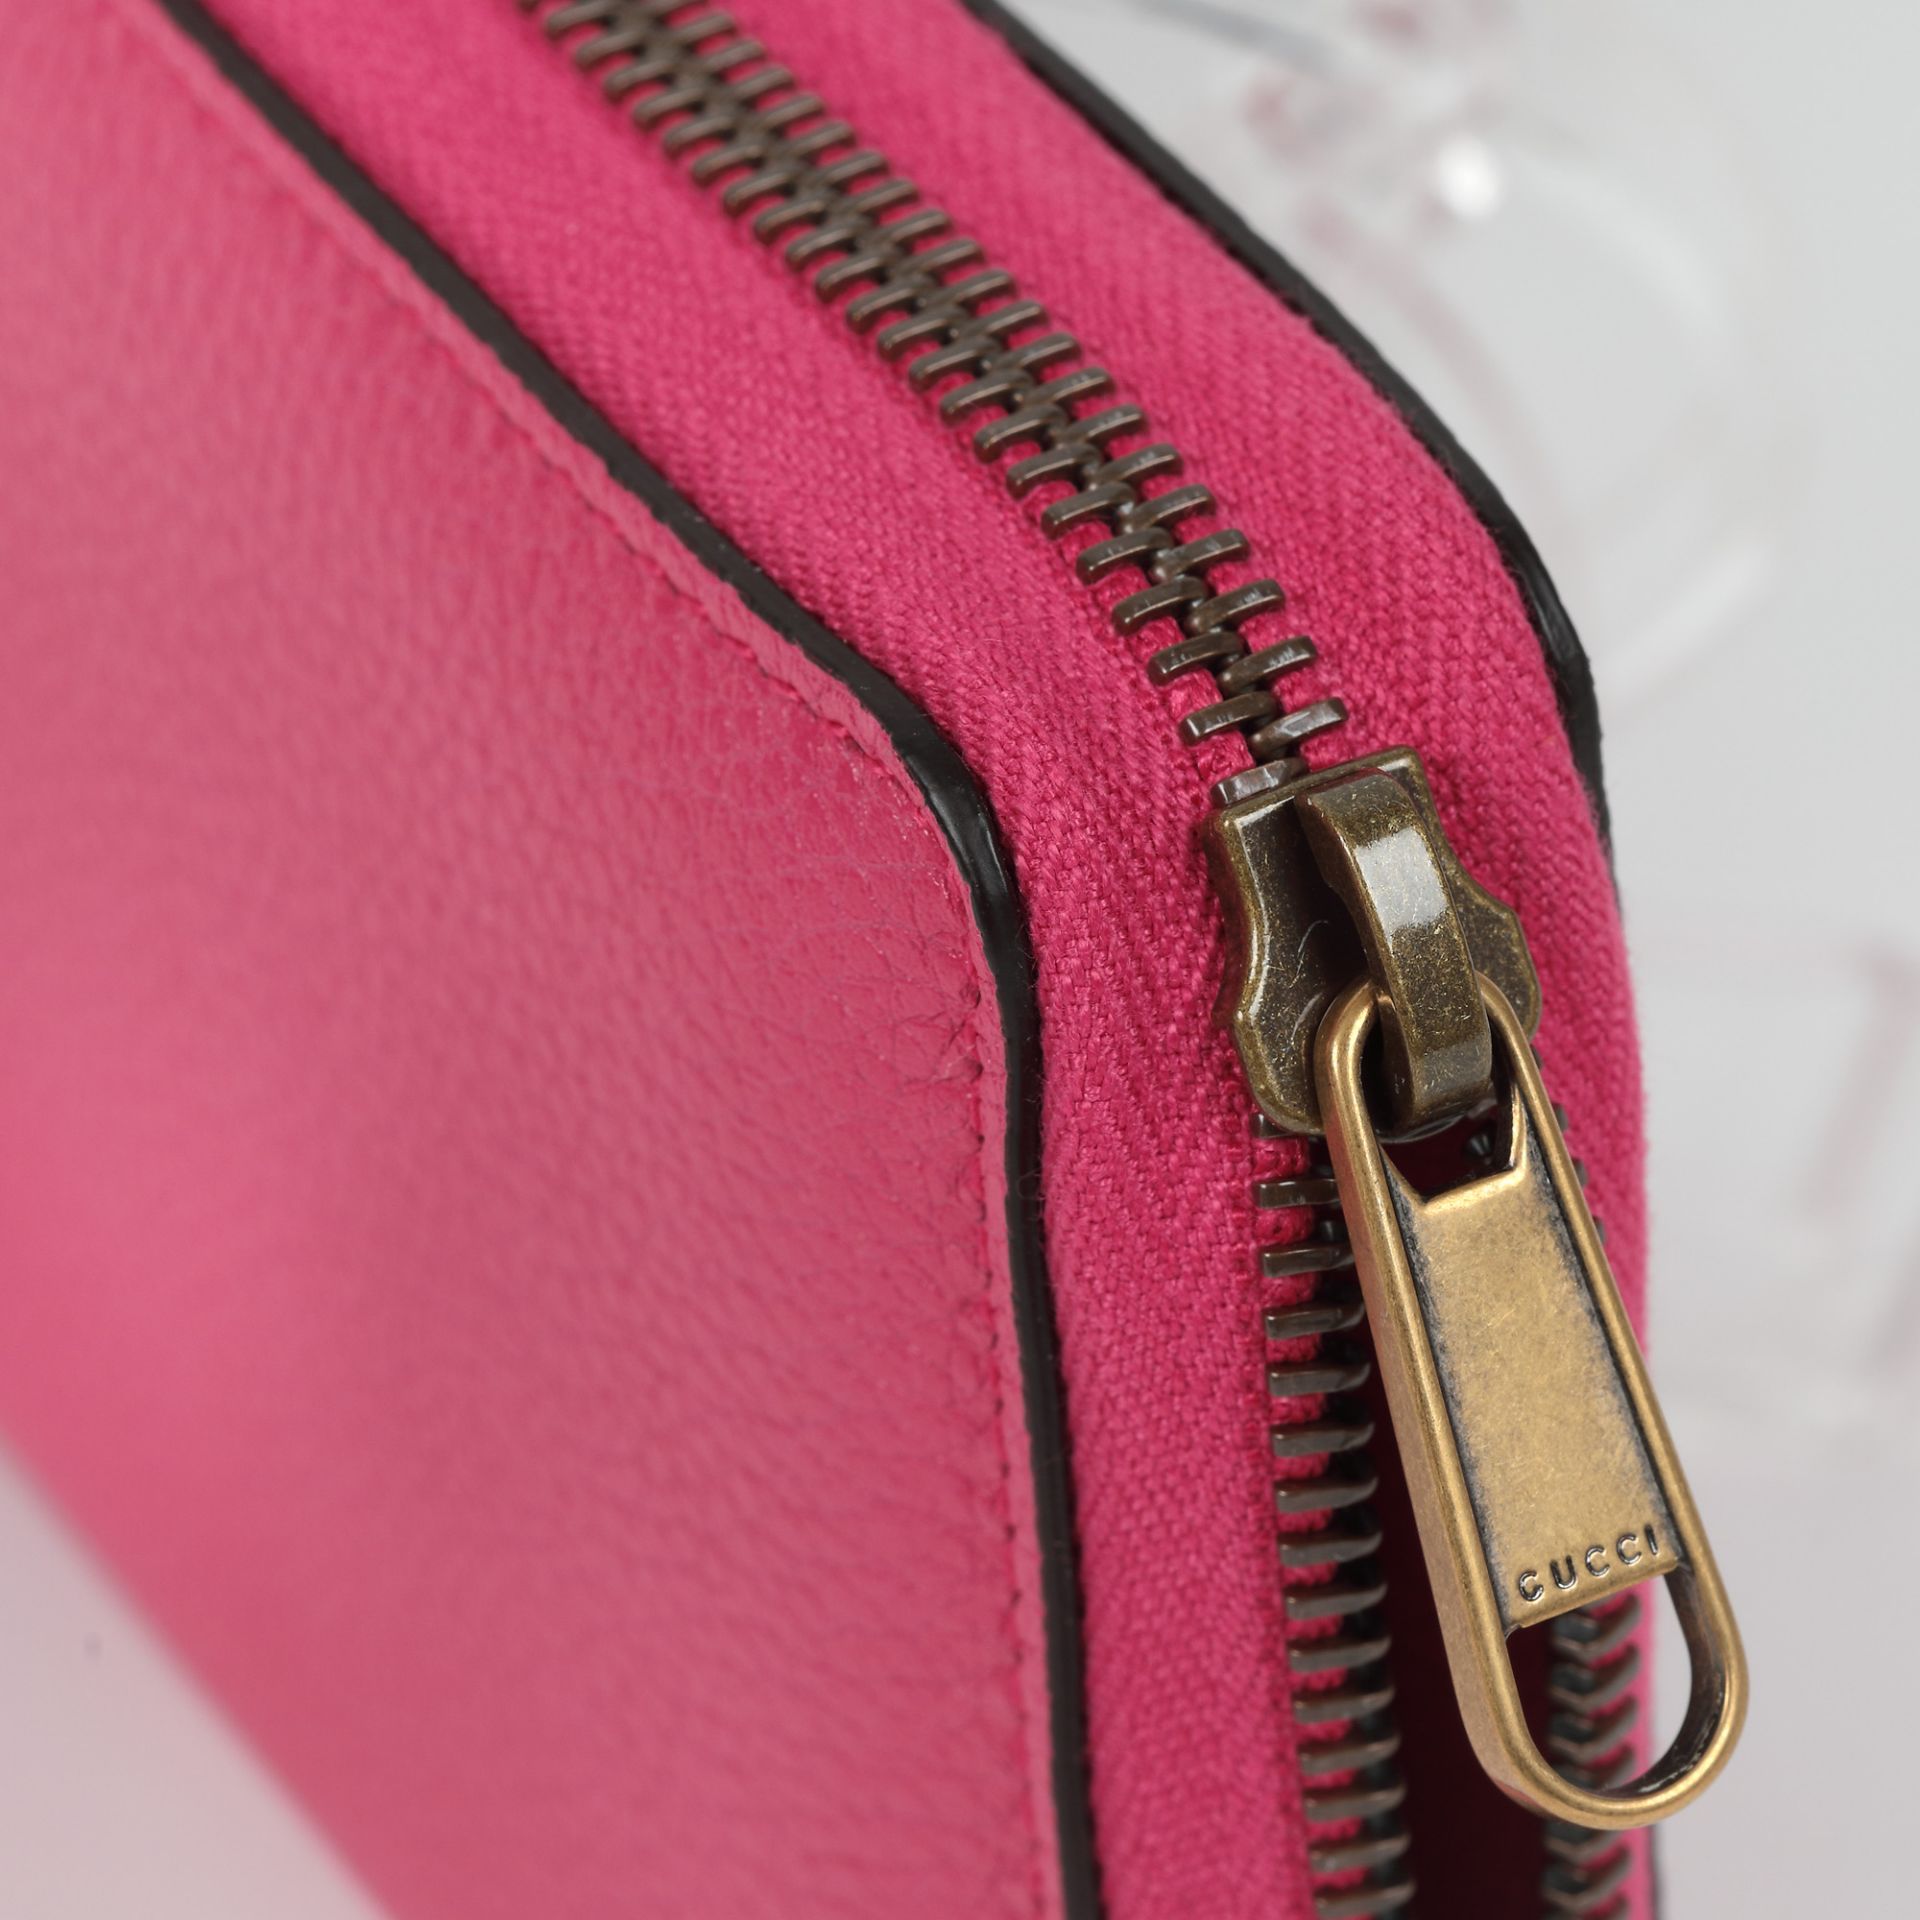 "Wallet GG" - Gucci wallet, leather, pink - Image 3 of 4